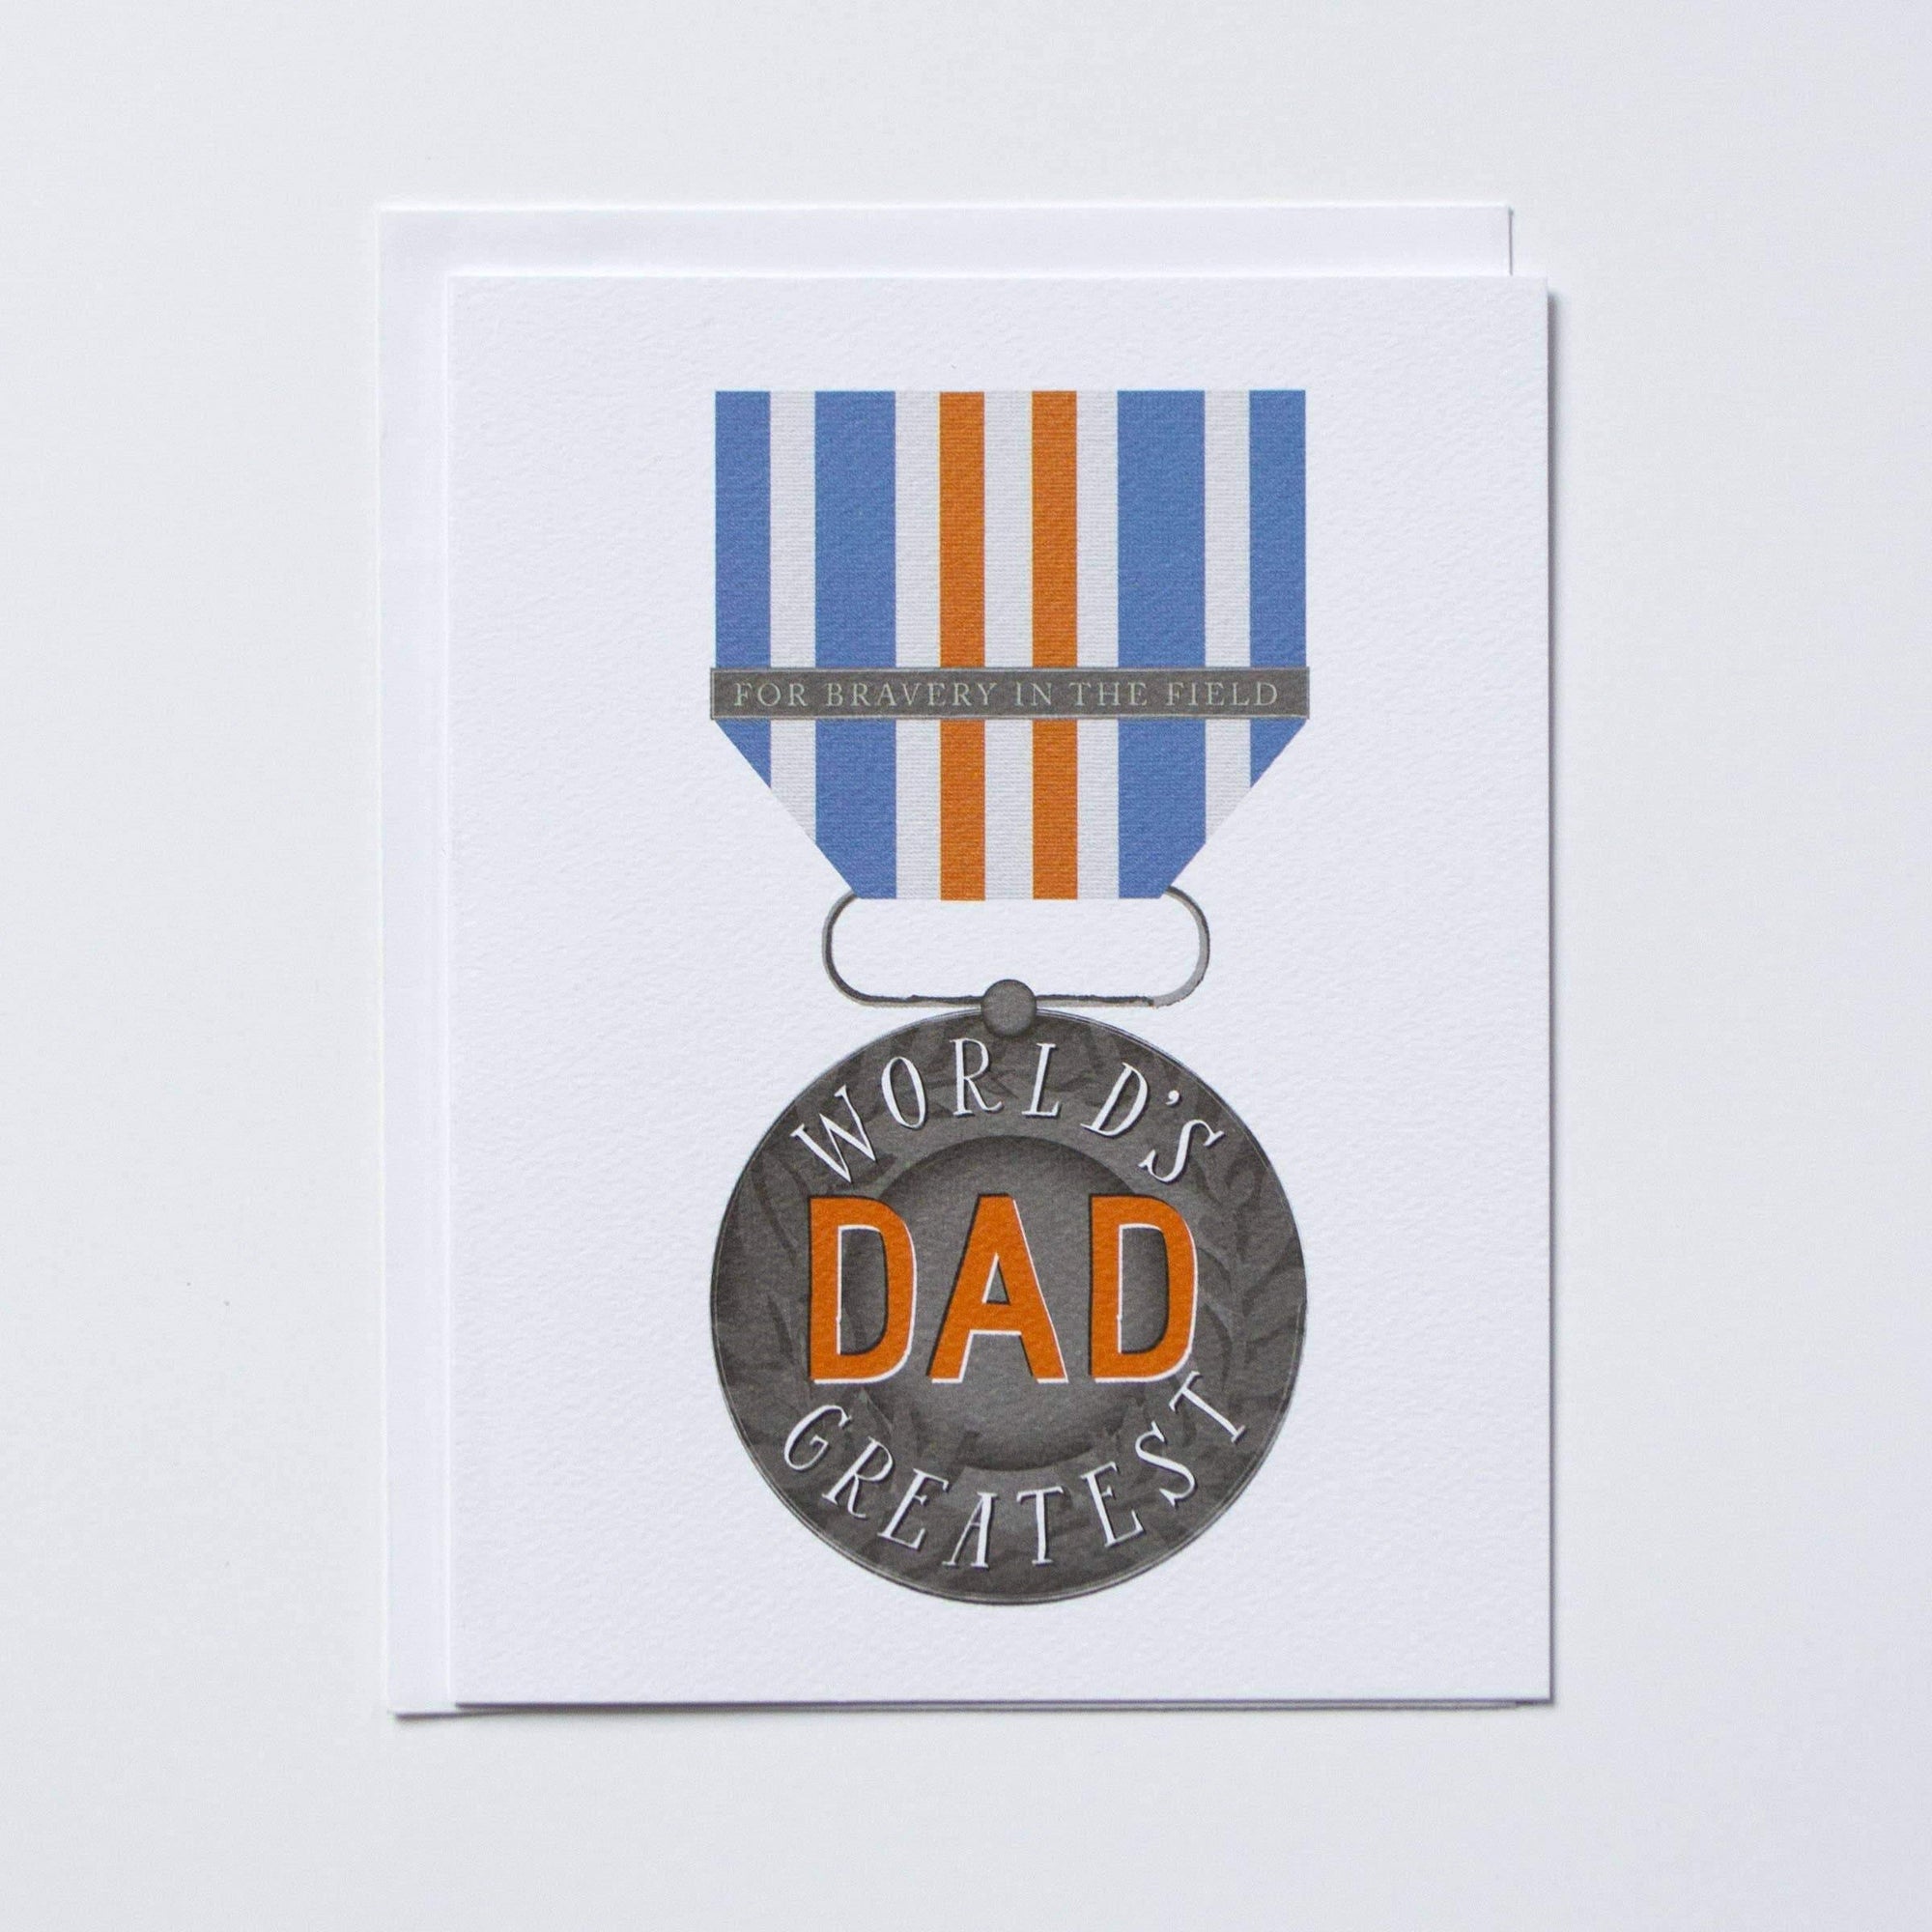 World's Greatest Dad Medal Note Card by Banquet Workshop - A. CHENG